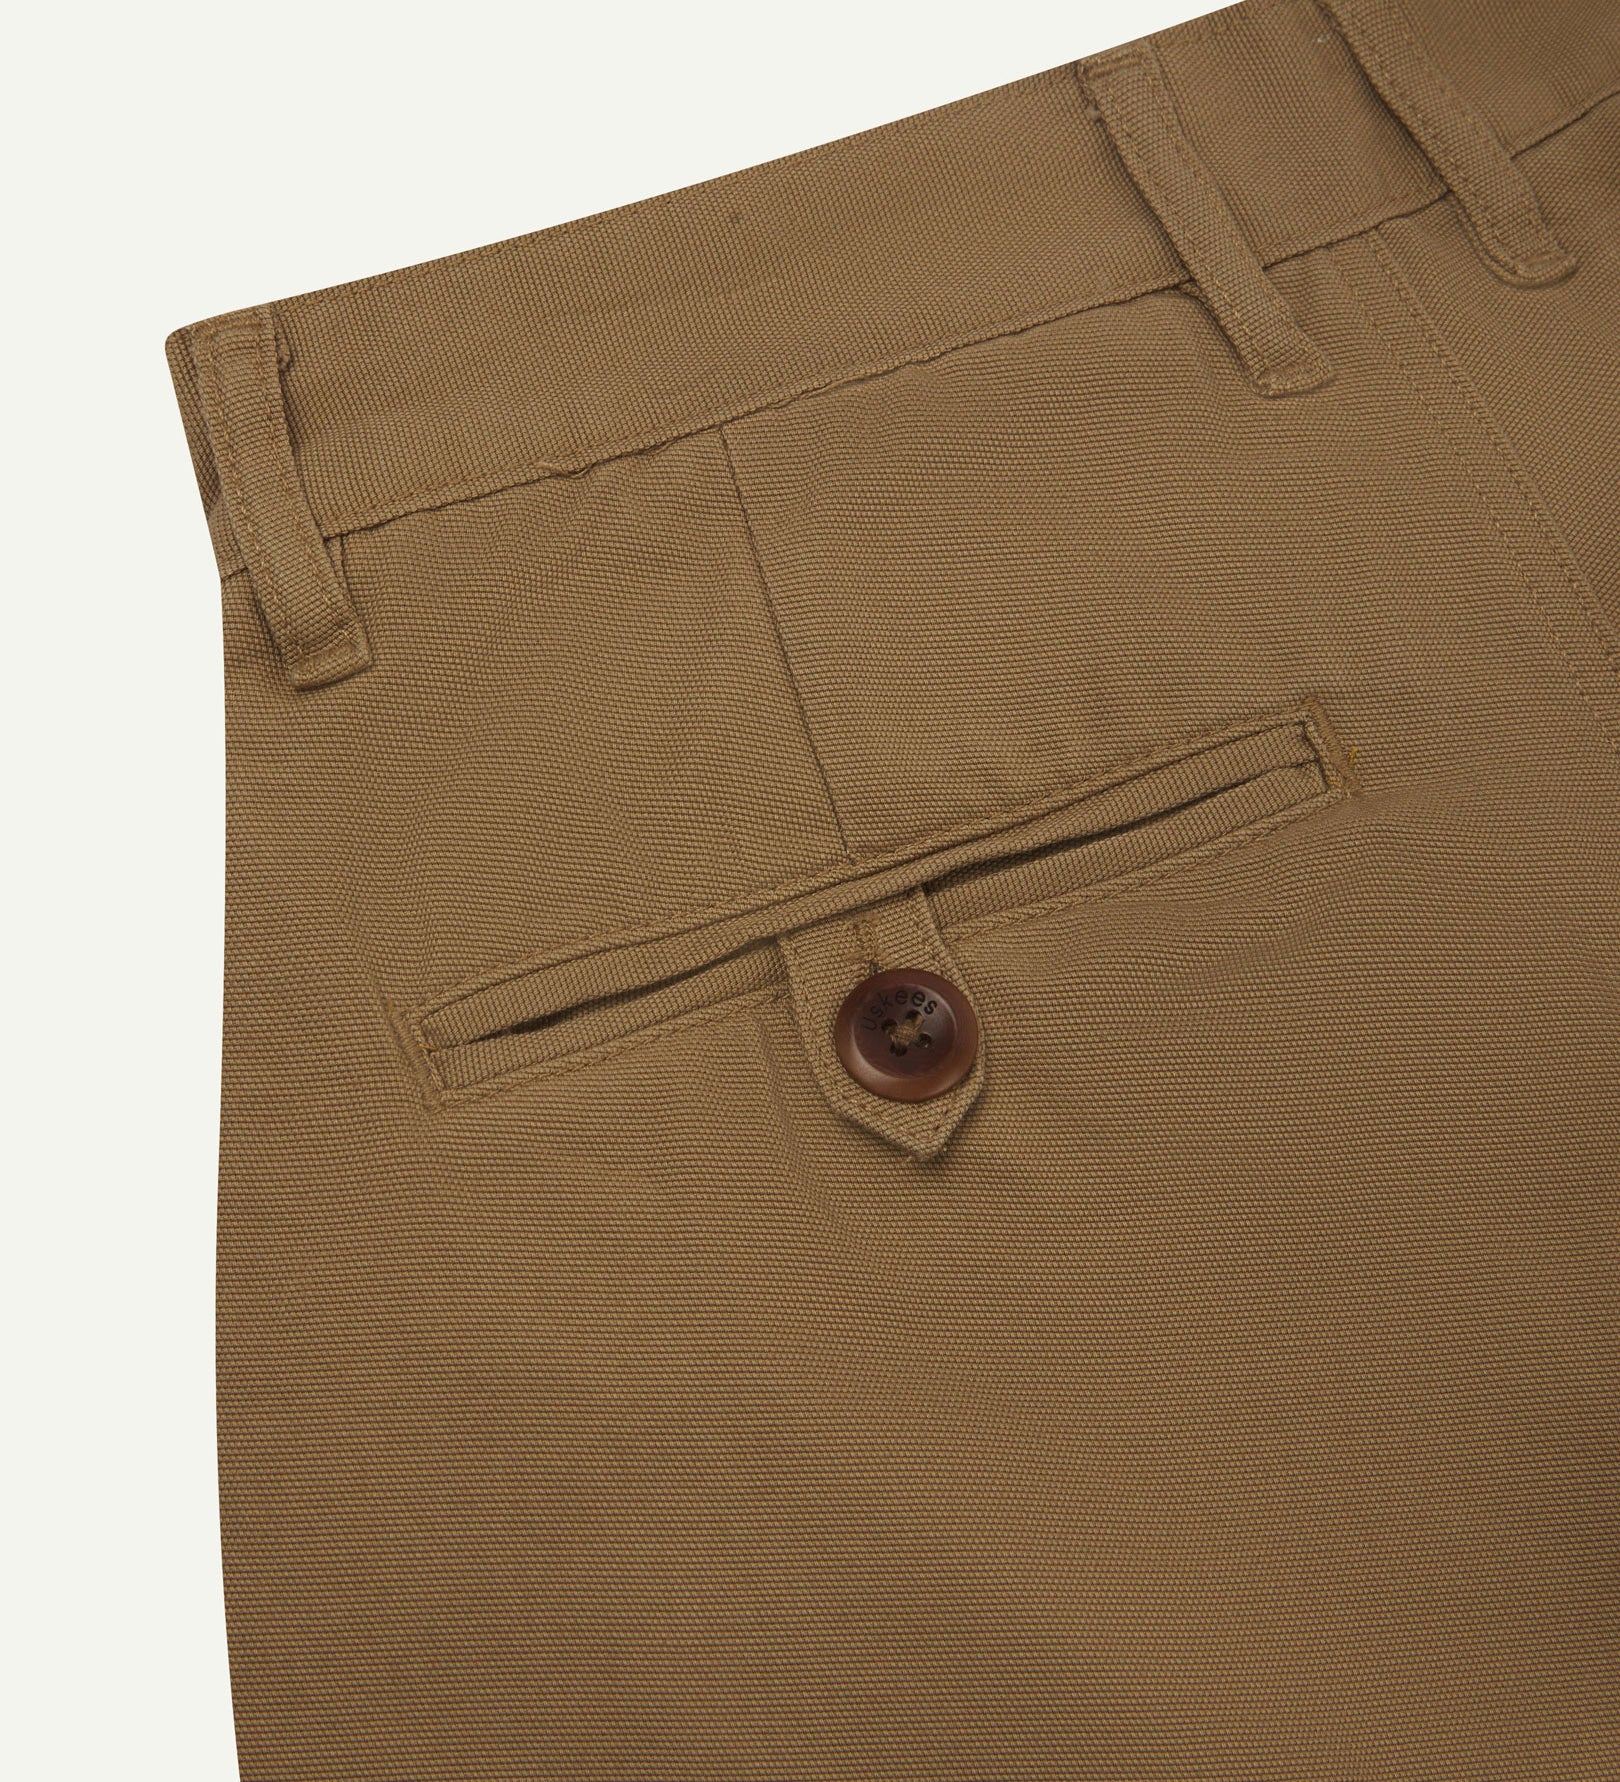 Back close-up view of 5018 Uskees men's organic mid-weight cotton boat trousers in acid khaki showing belt loops and buttoned back pocket.